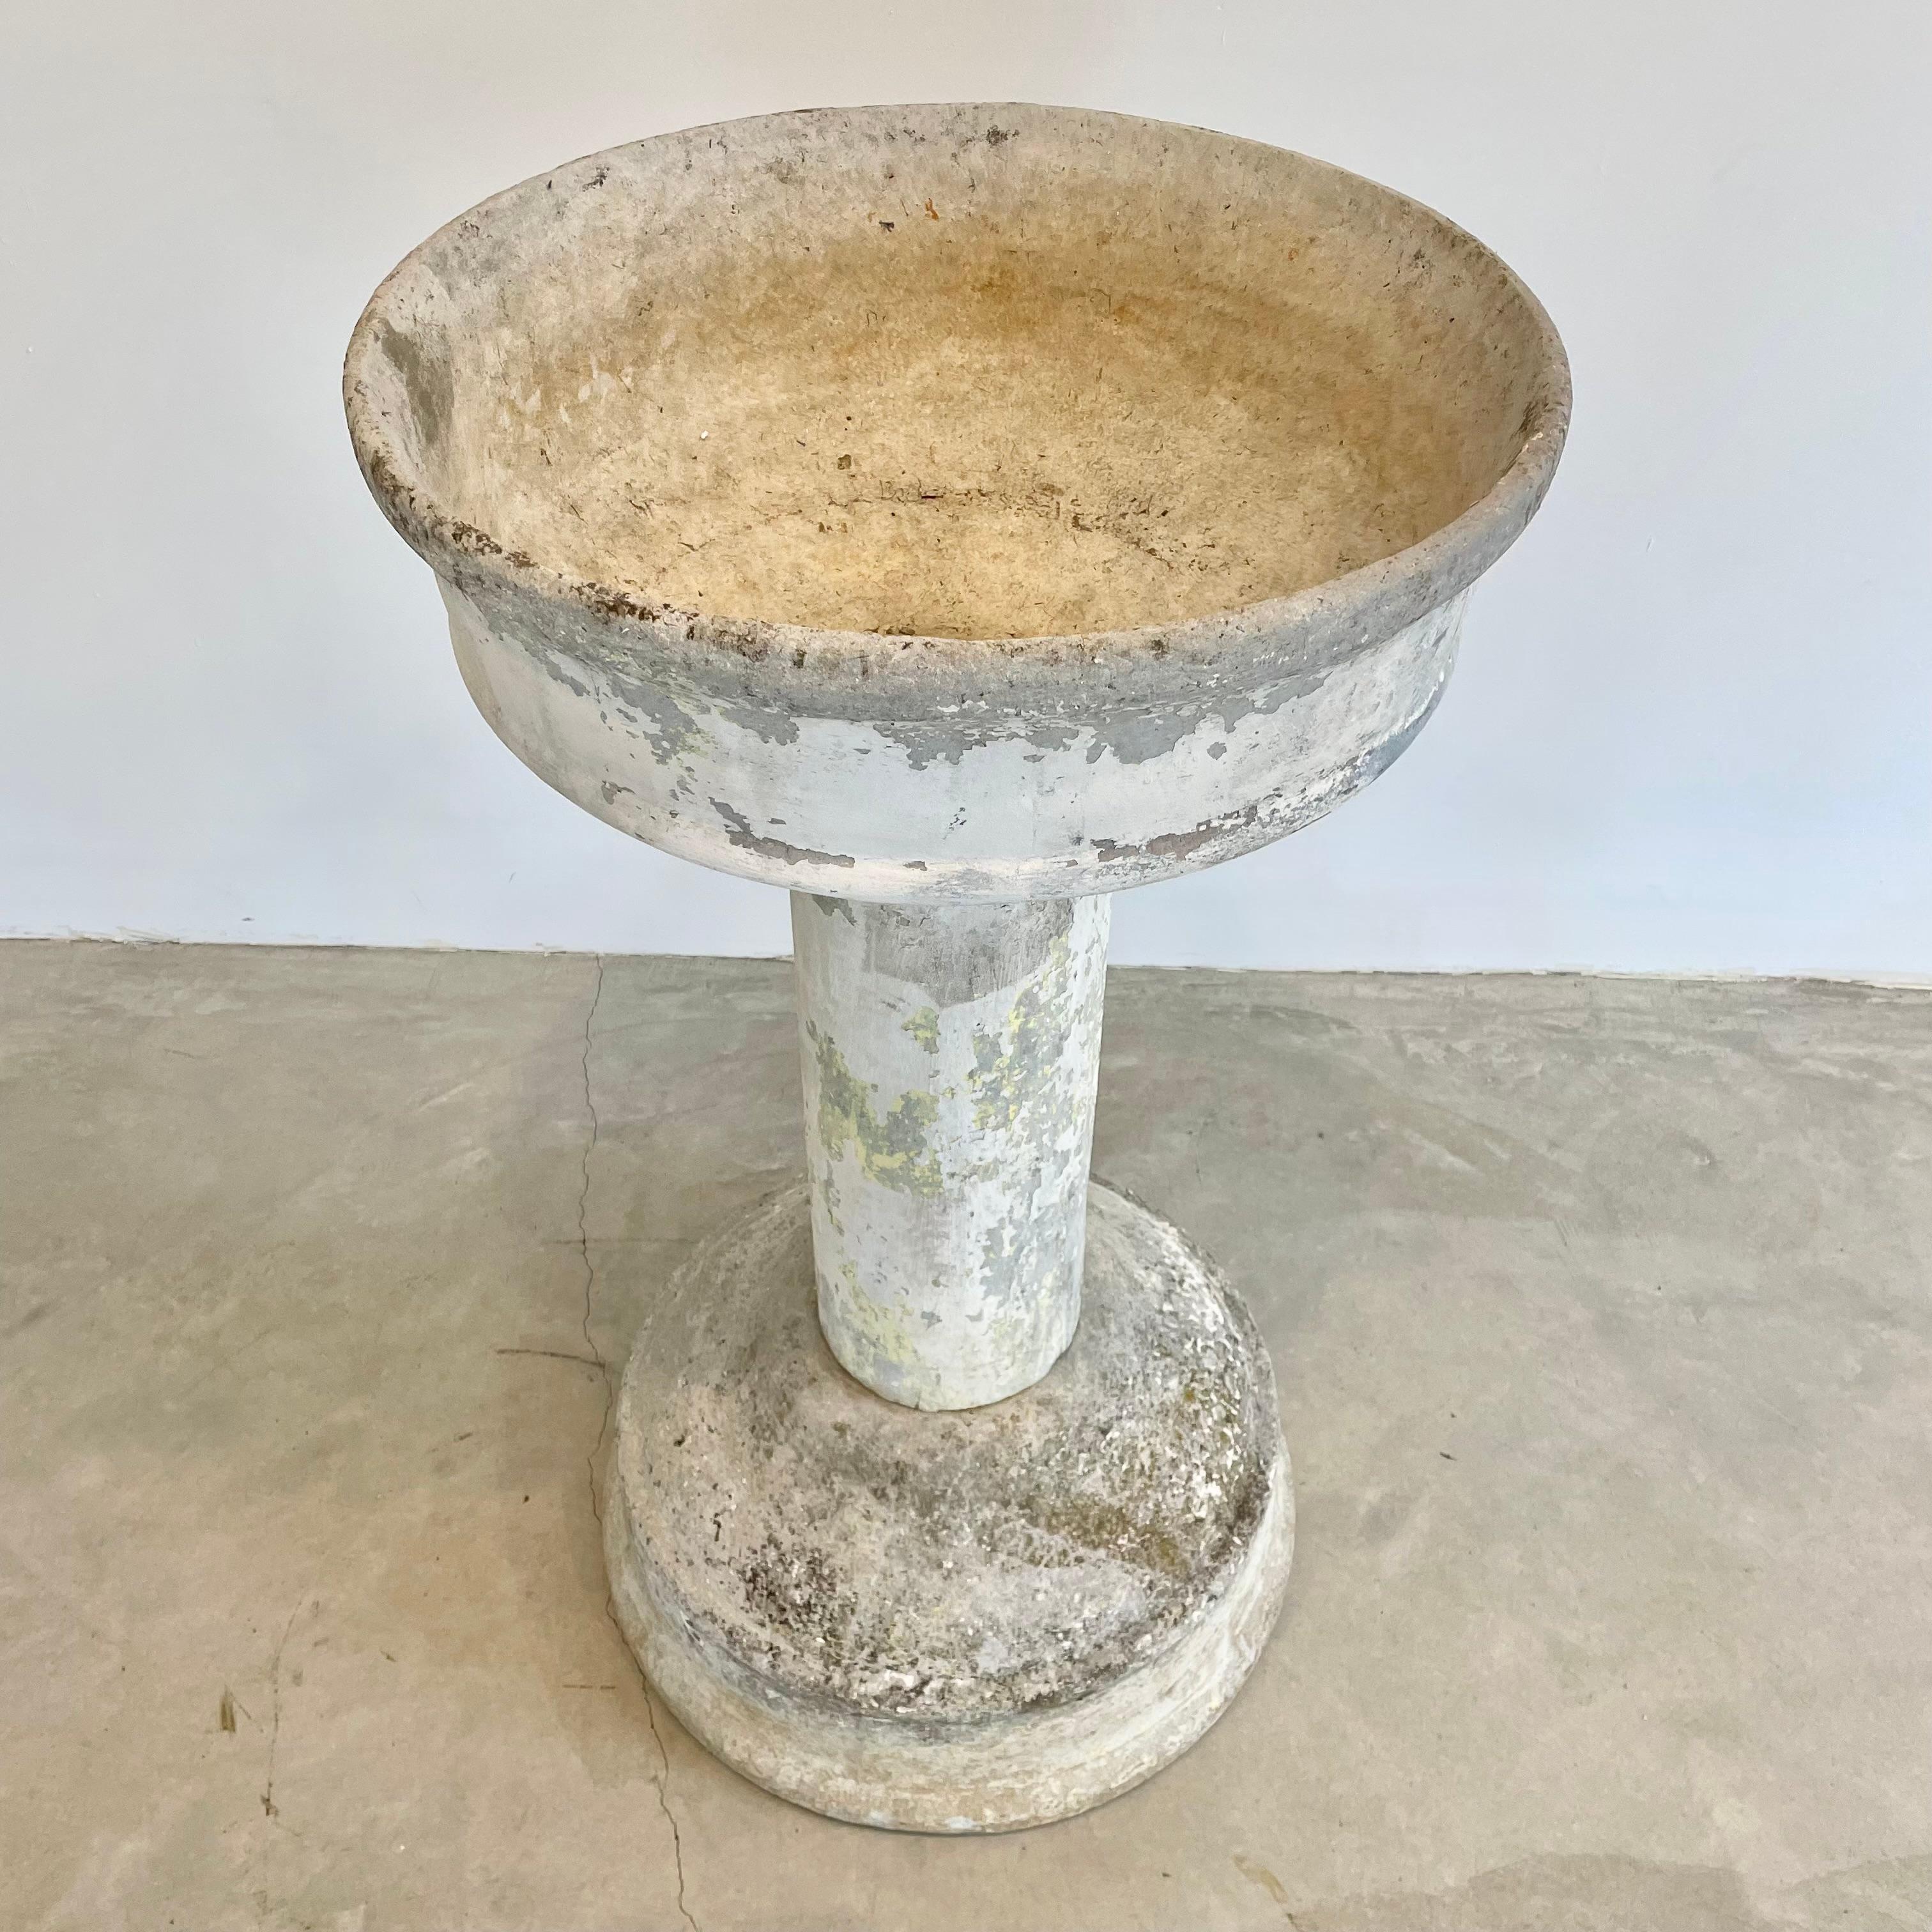 Massive and rare concrete fountain by Willy Guhl for Eternit. Fabricated out of three pieces of cement. Large basin on both ends with hollow cylinder connecting the two. Great sculpture and object. Bowl has factory drilled holes to allow water to